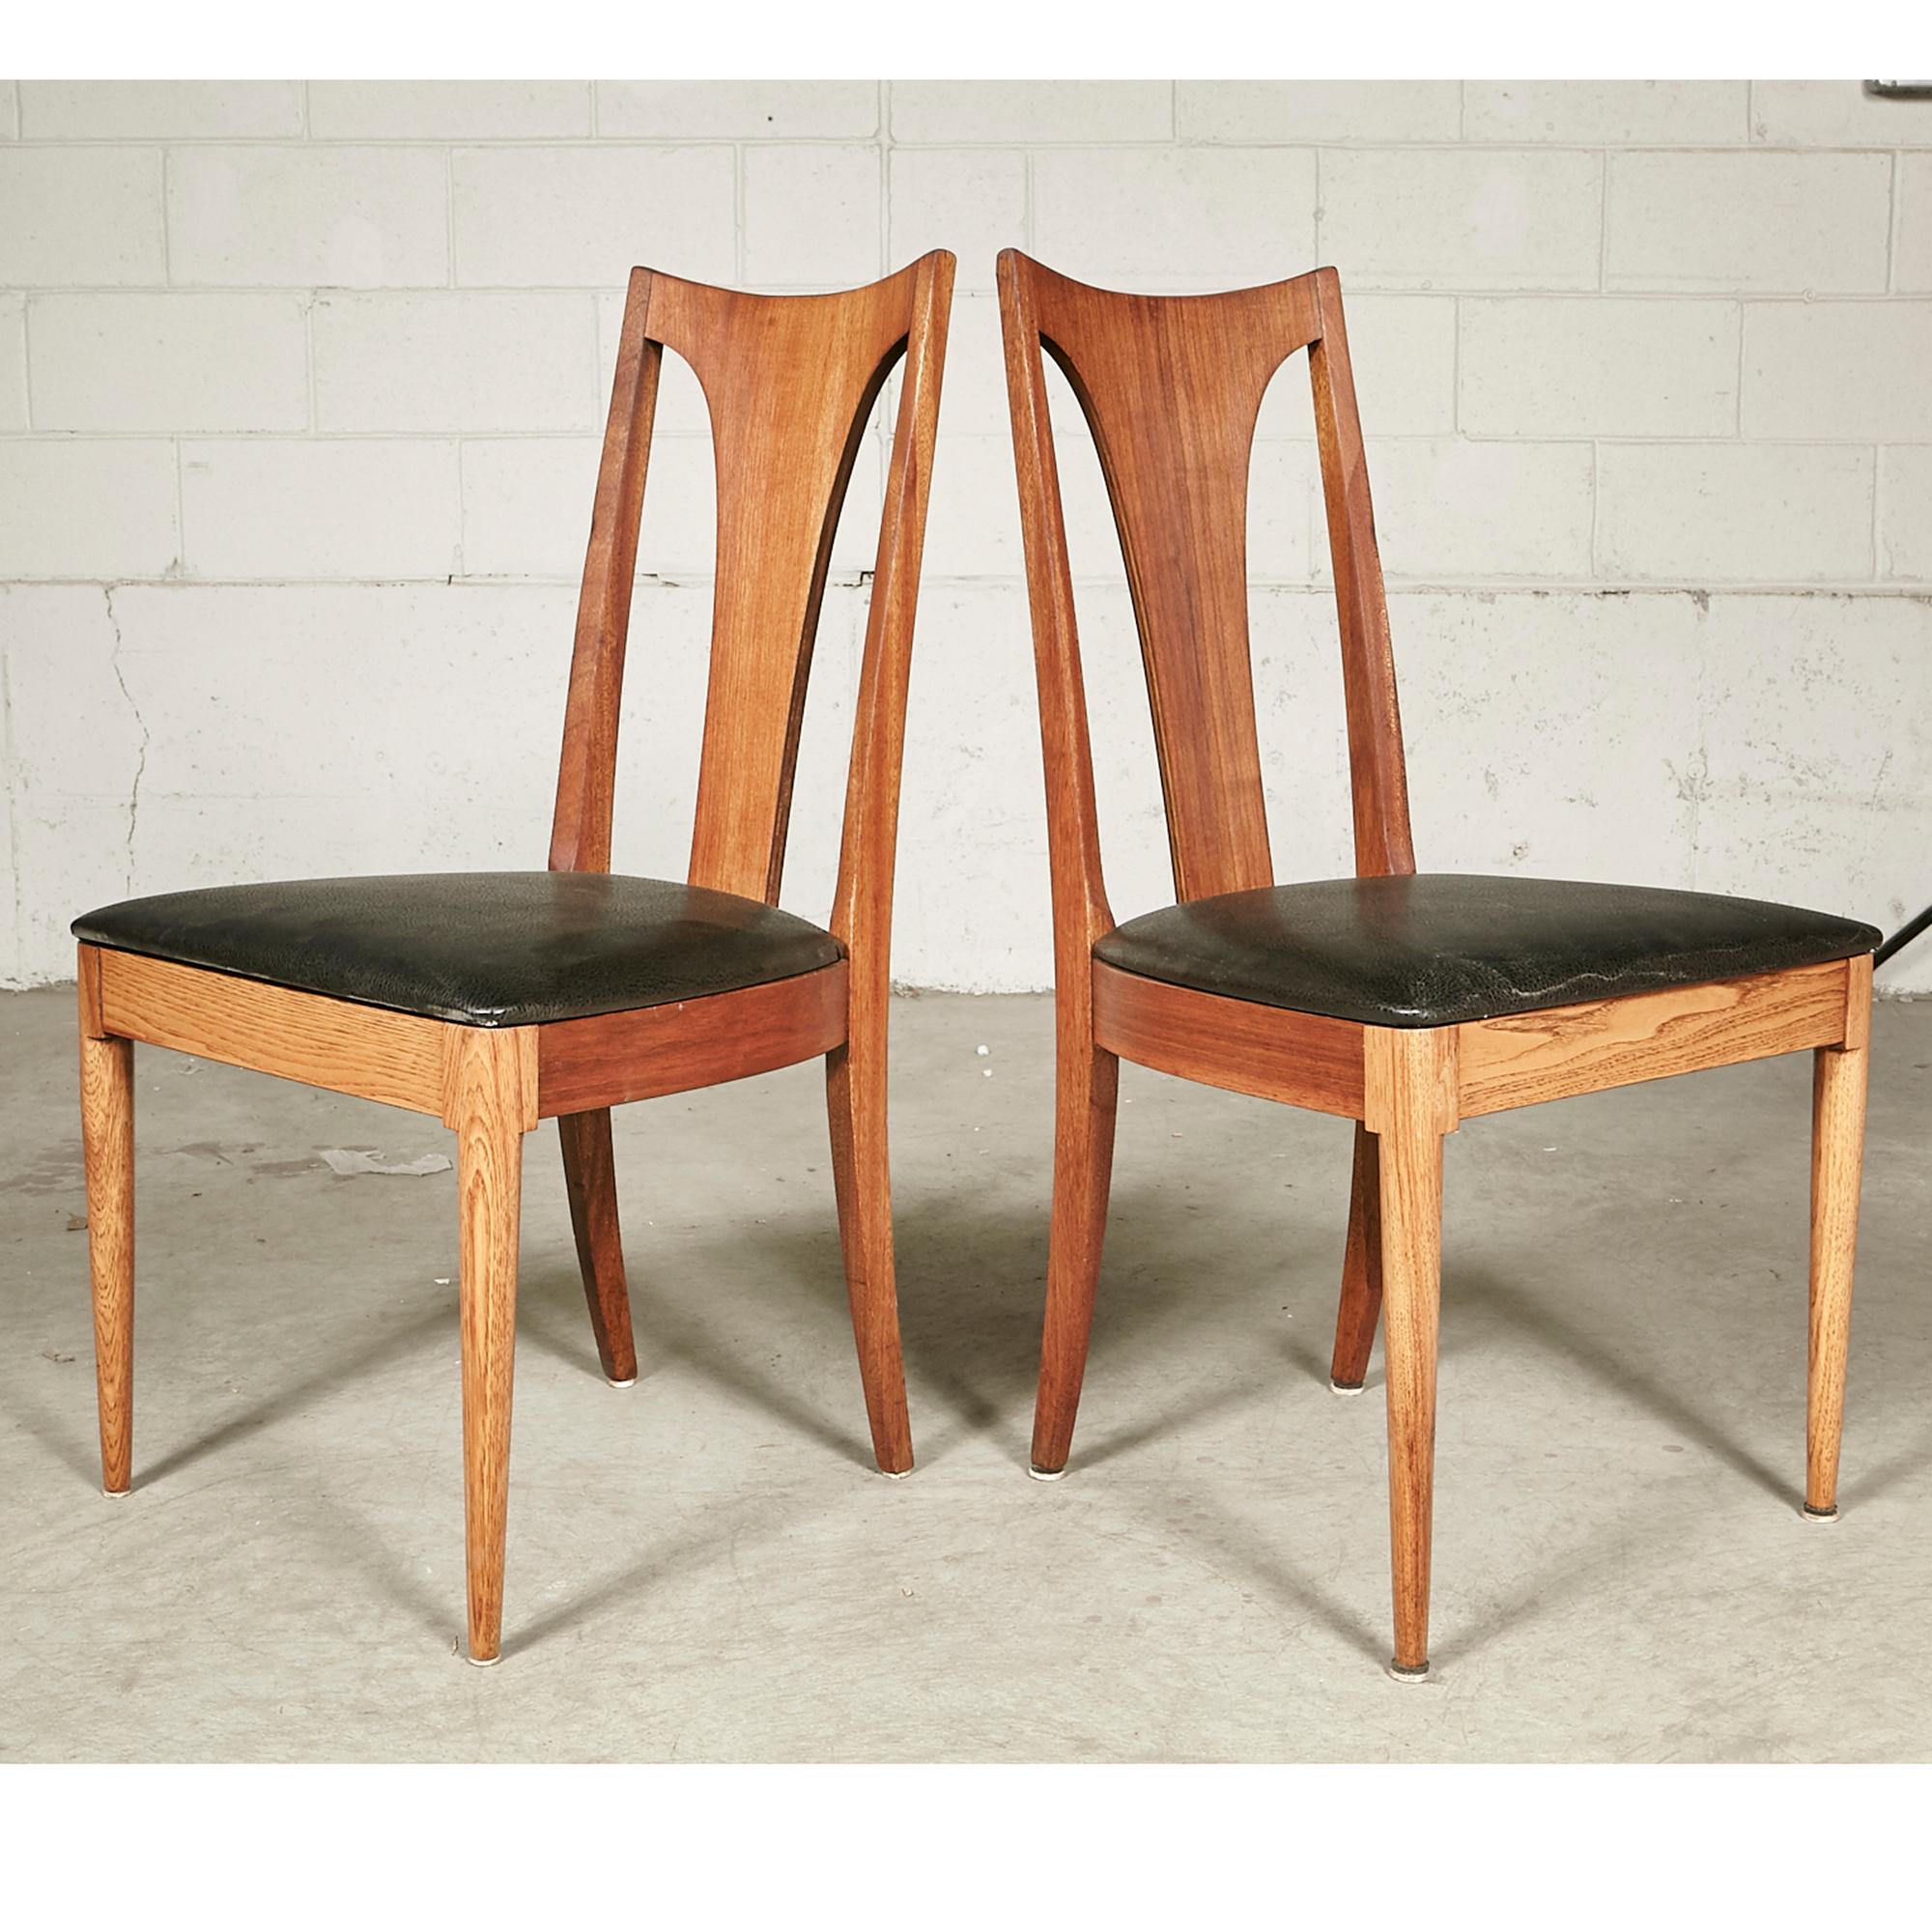 Mid-Century Modern 1960s Brasilia-Style Dining Chairs, Set of 4 For Sale